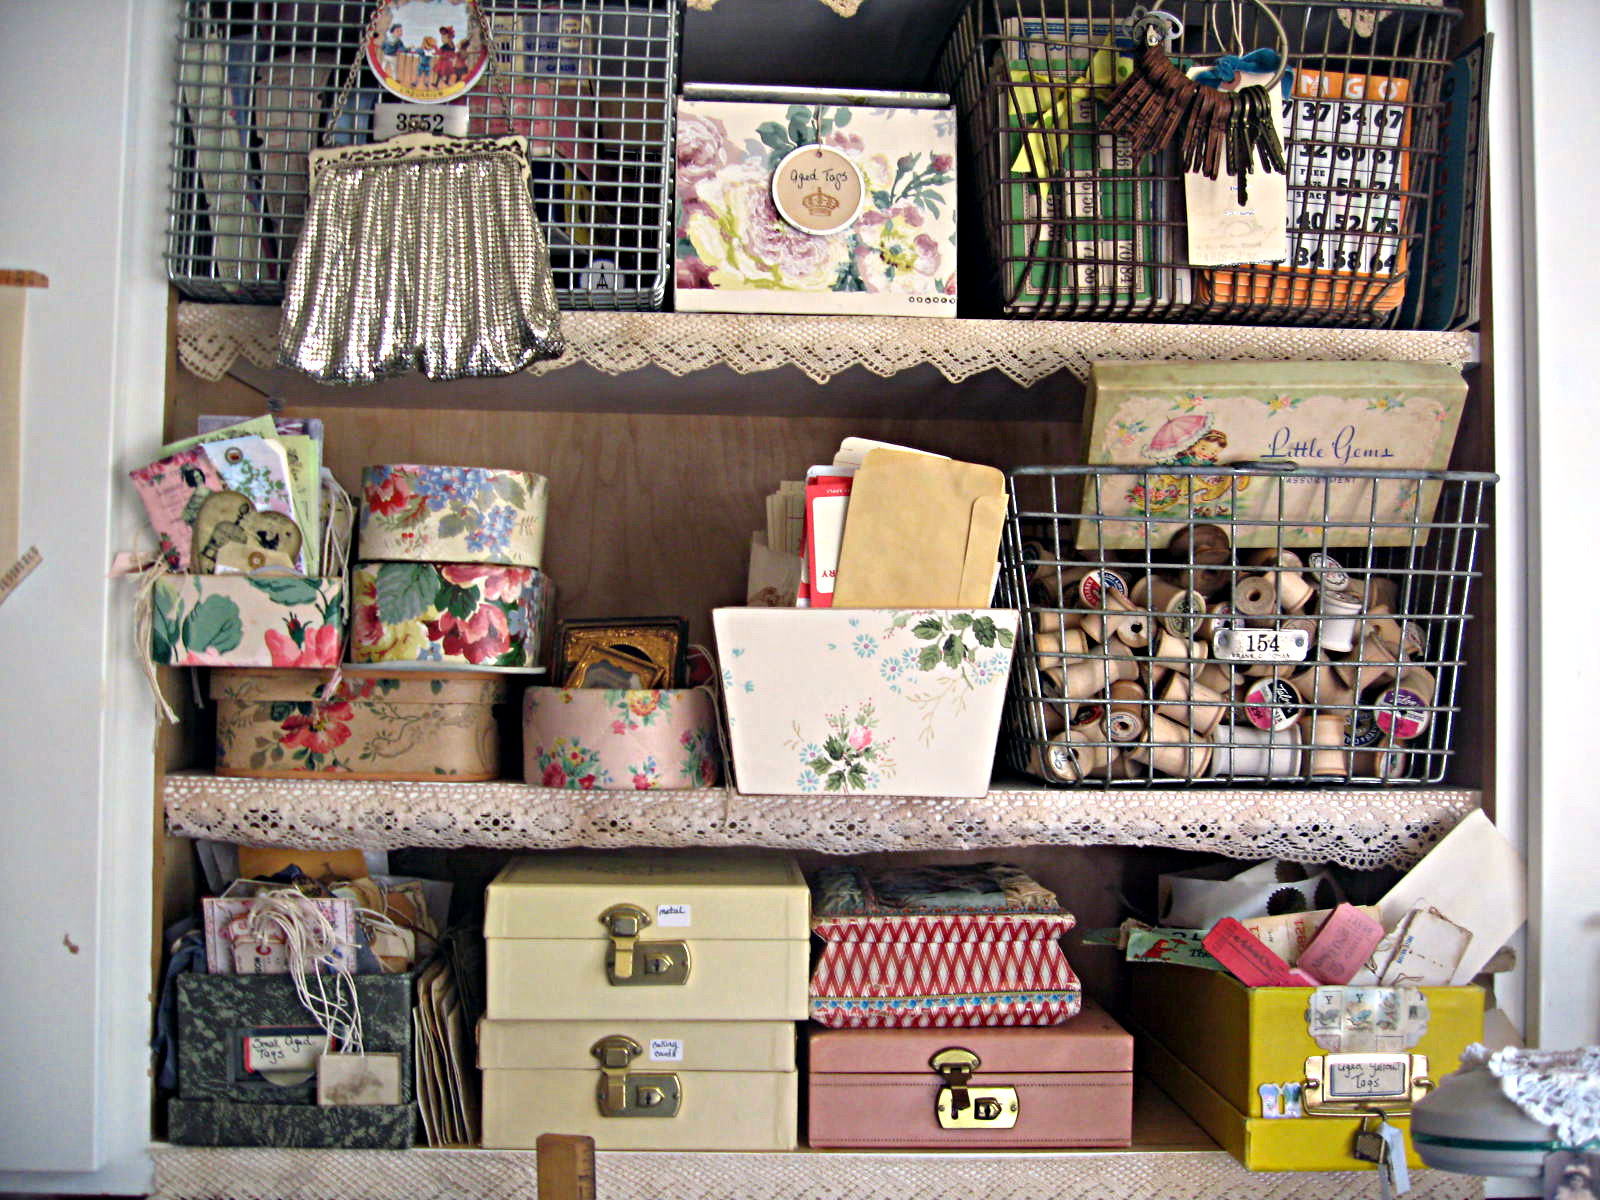  storage and more storage I love to use old locker baskets